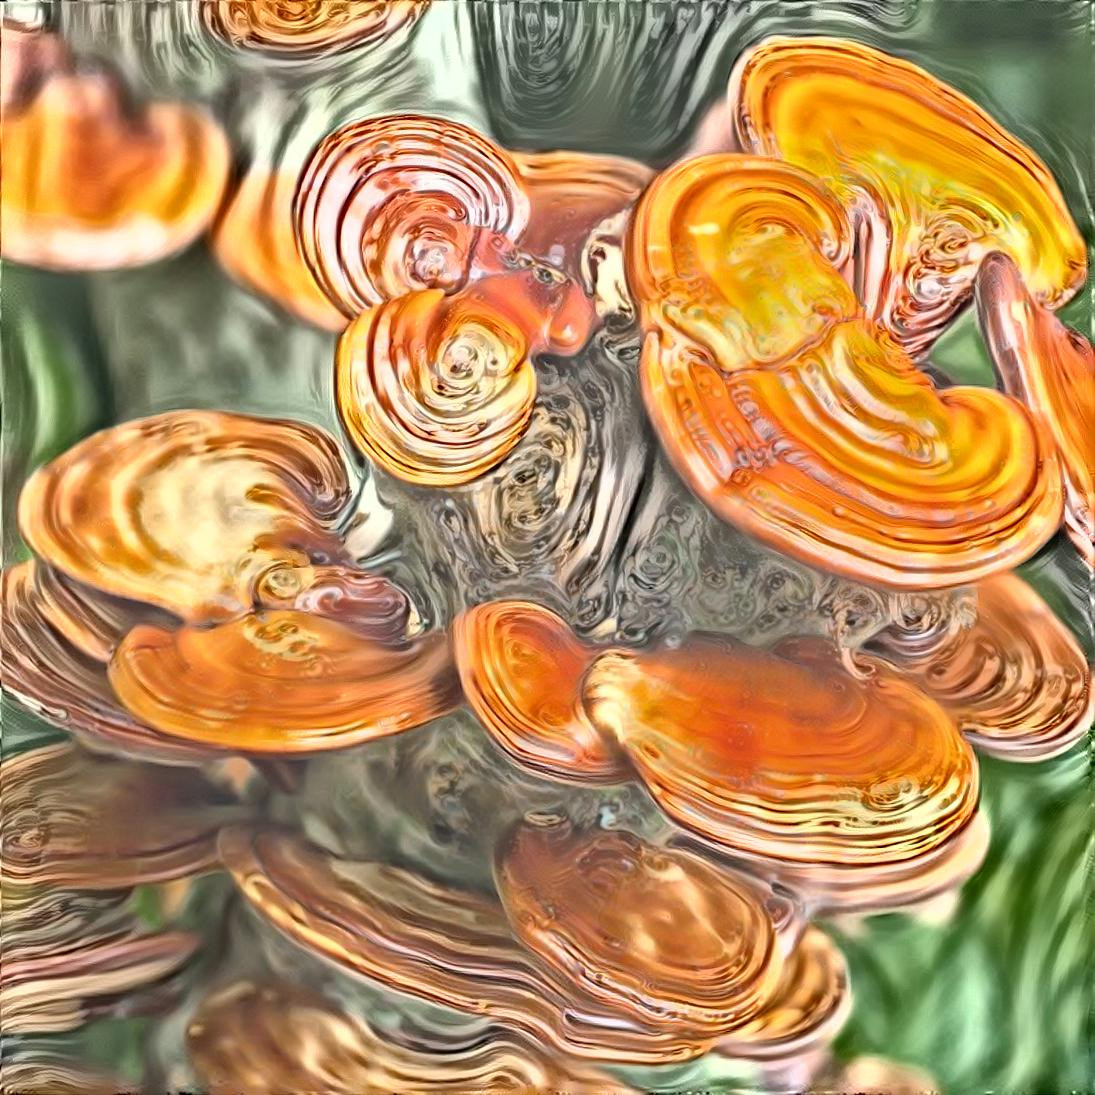 rimple in the reishi